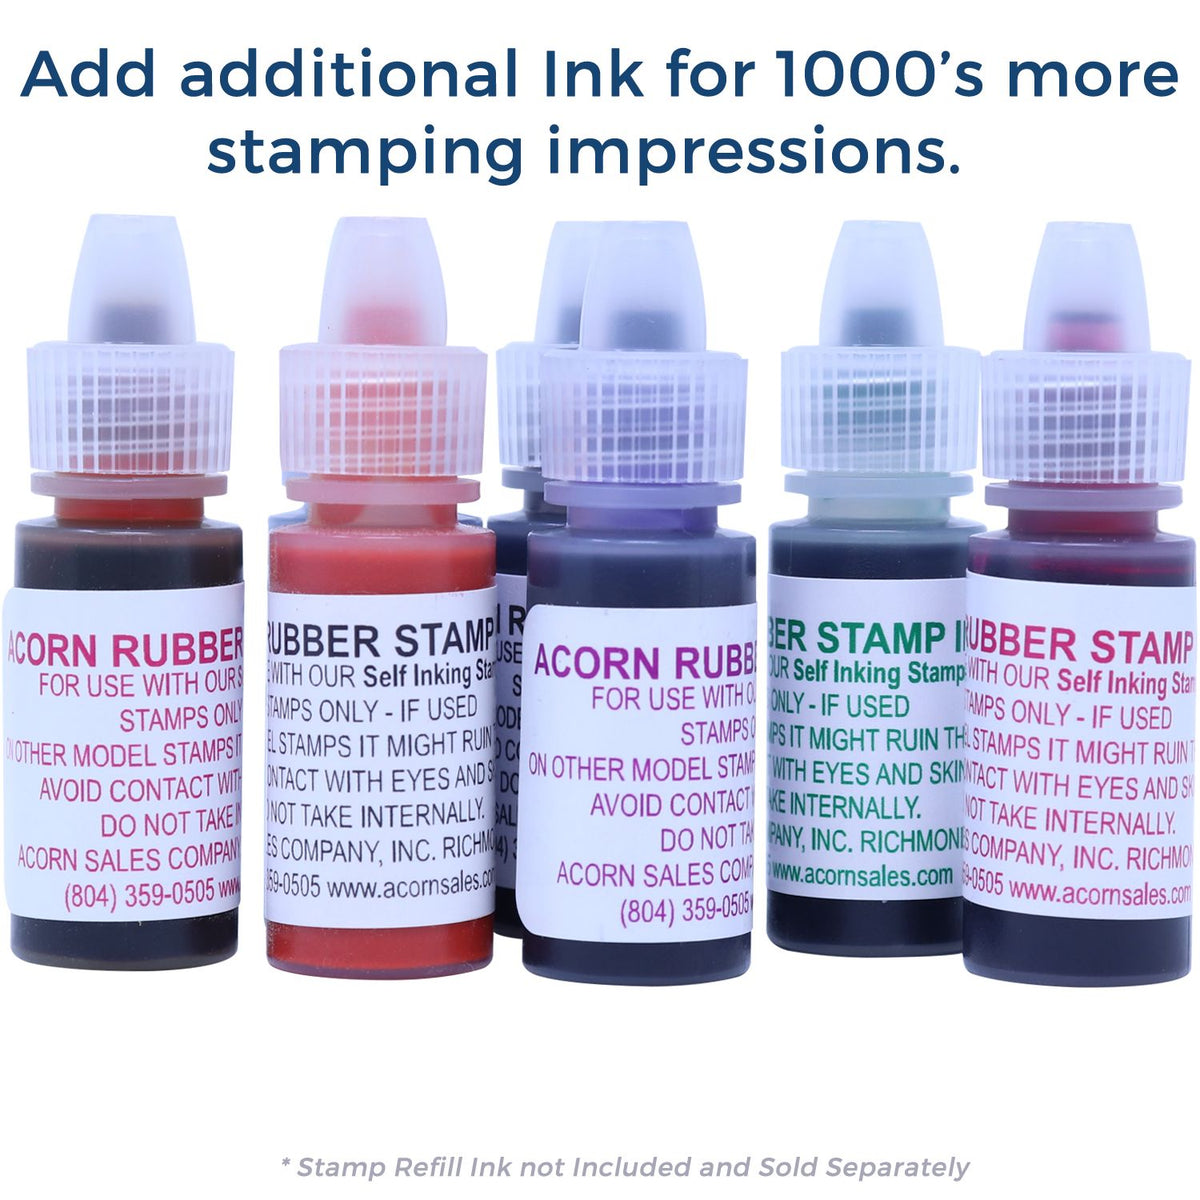 Refill Ink for Self-Inking Round Thank You Stamp Available